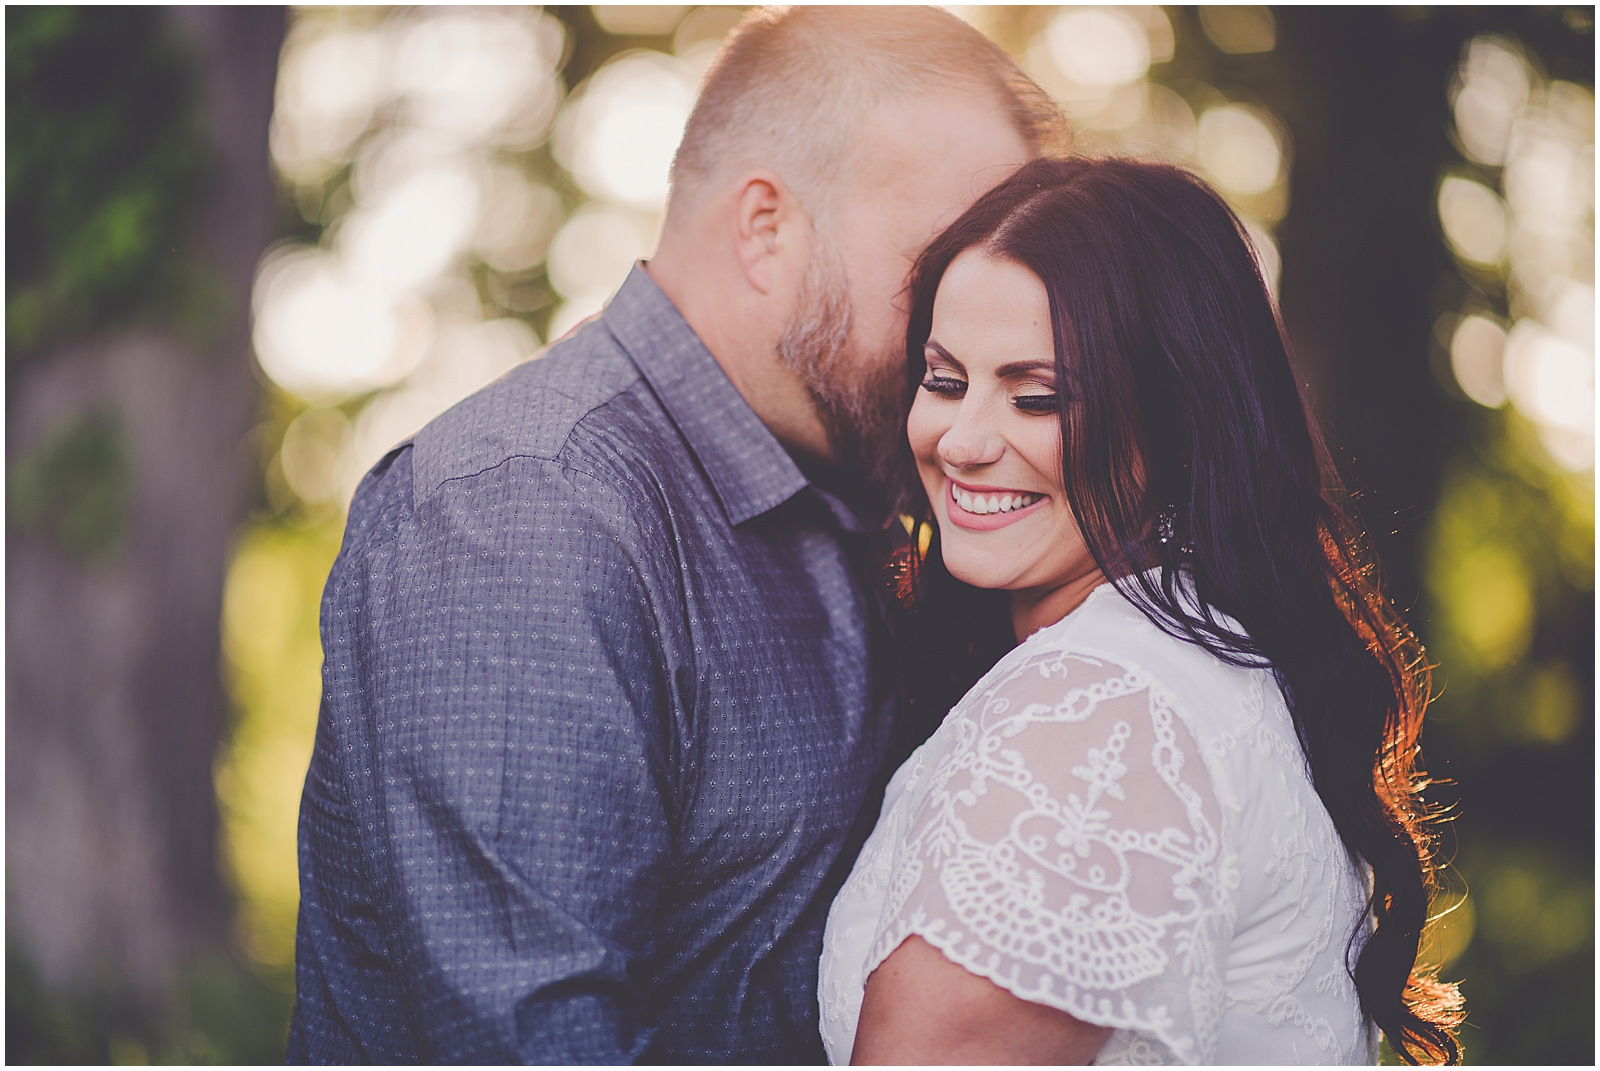 Antonia and John's summer sunset engagement at Cantigny Park in Wheaton, Illinois with Chicagoland wedding photographer Kara Evans Photographer.